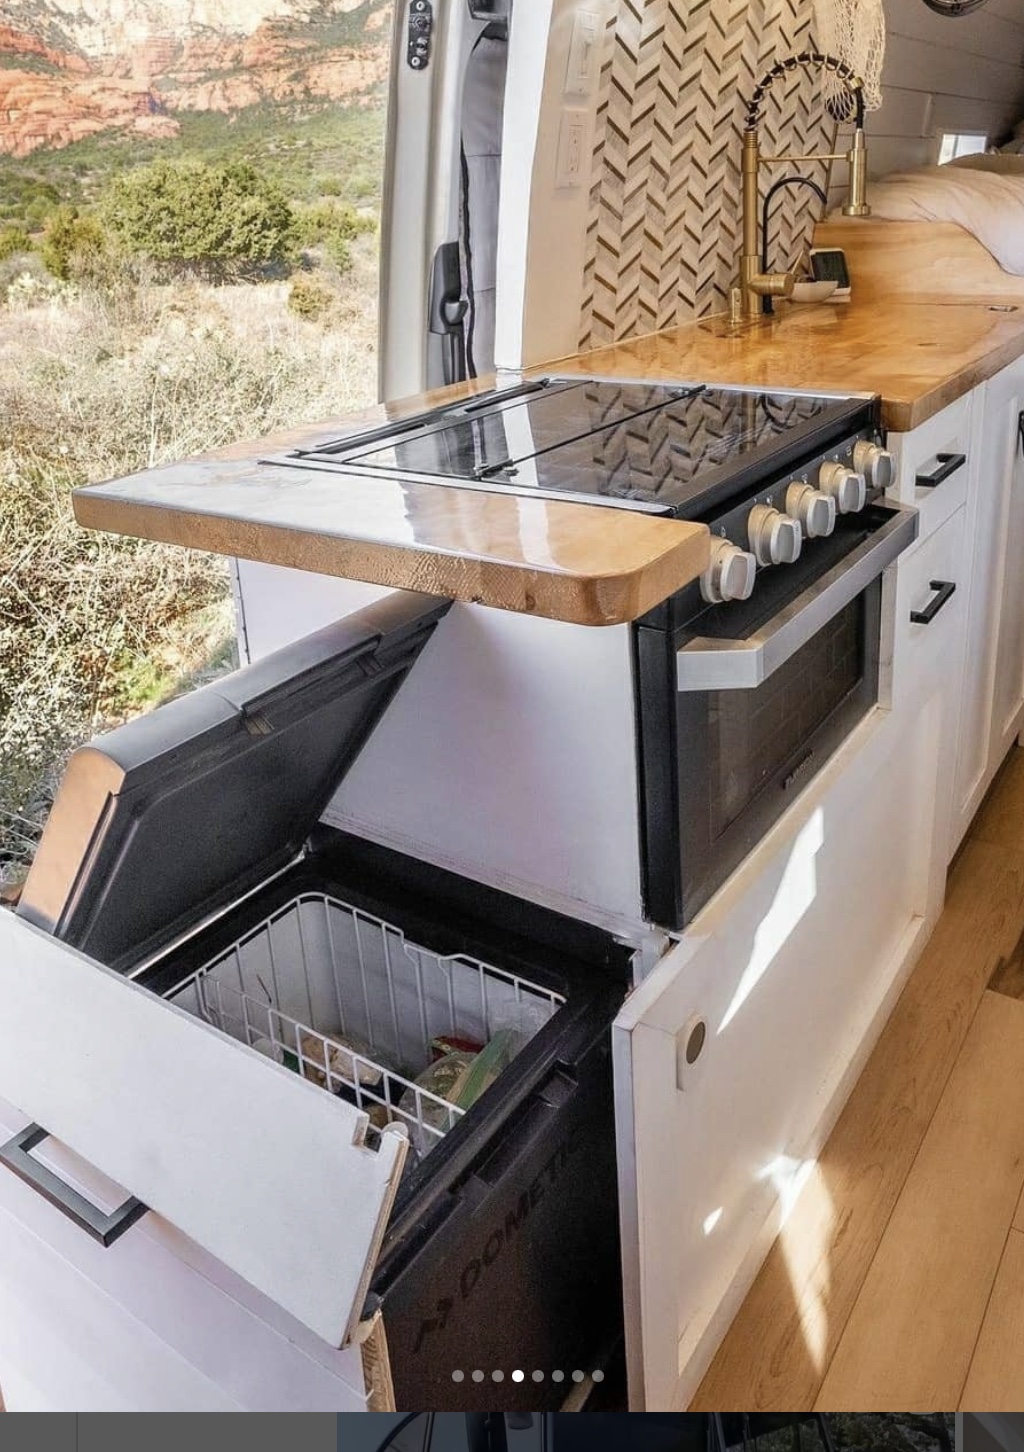 Stylish kitchen in a van with storage, sink and stove. 